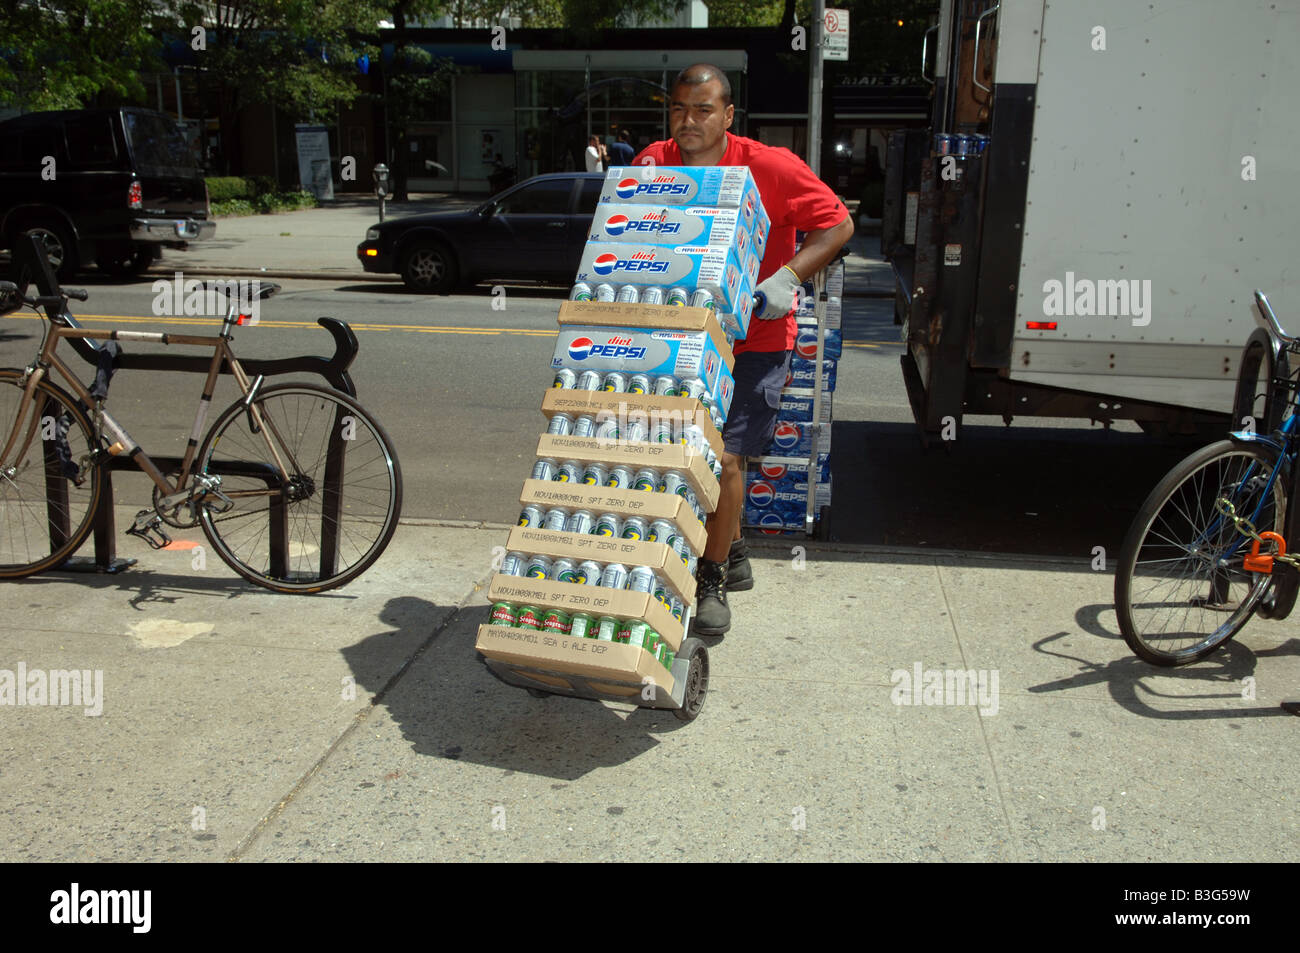 Delivery man brings a supply of soda including Diet Pepsi Cola to a grocery in New York Stock Photo